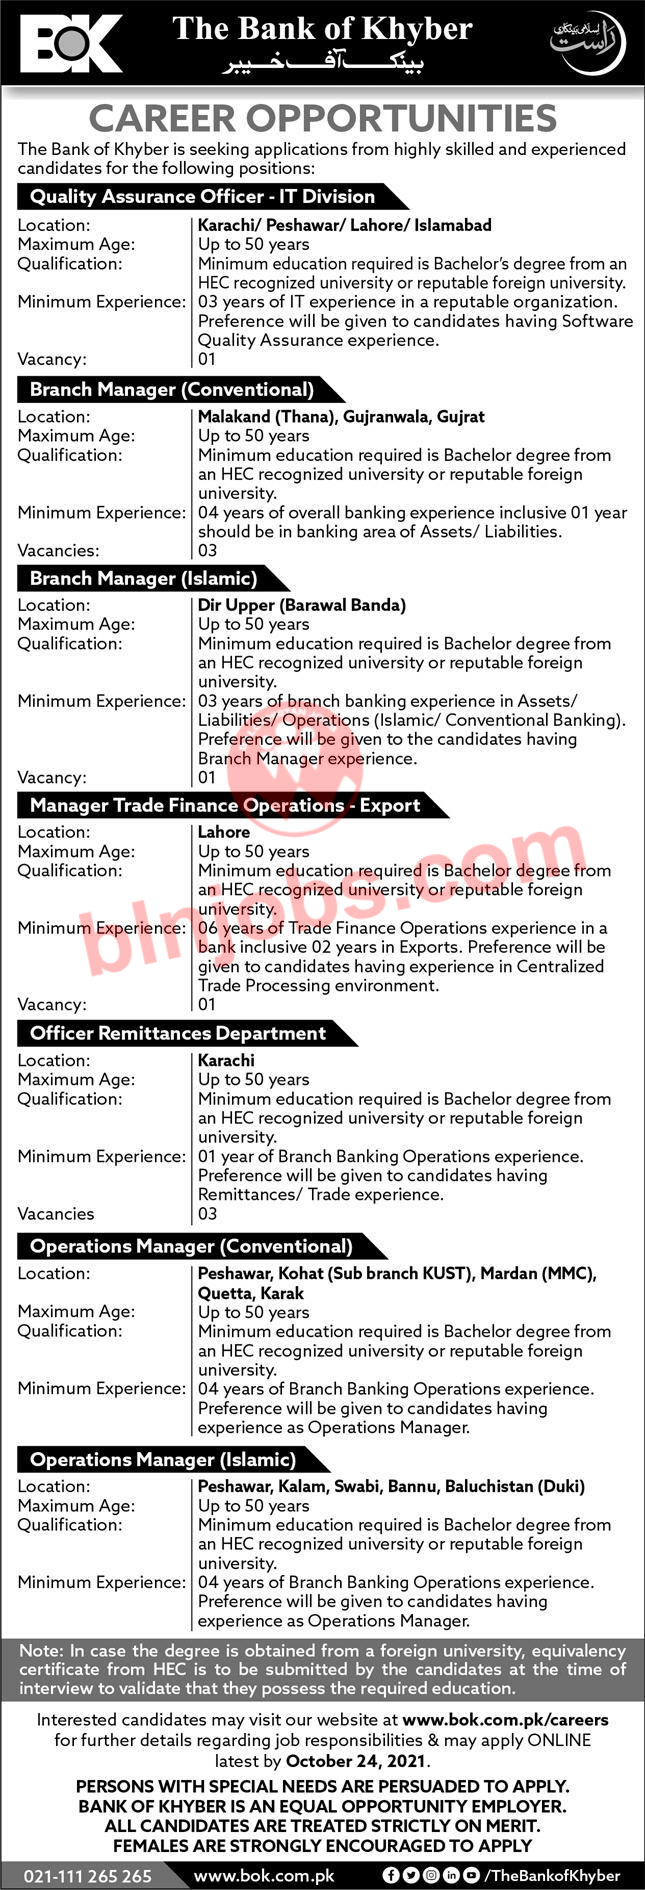 The Bank of Khyber BOK Jobs 2021